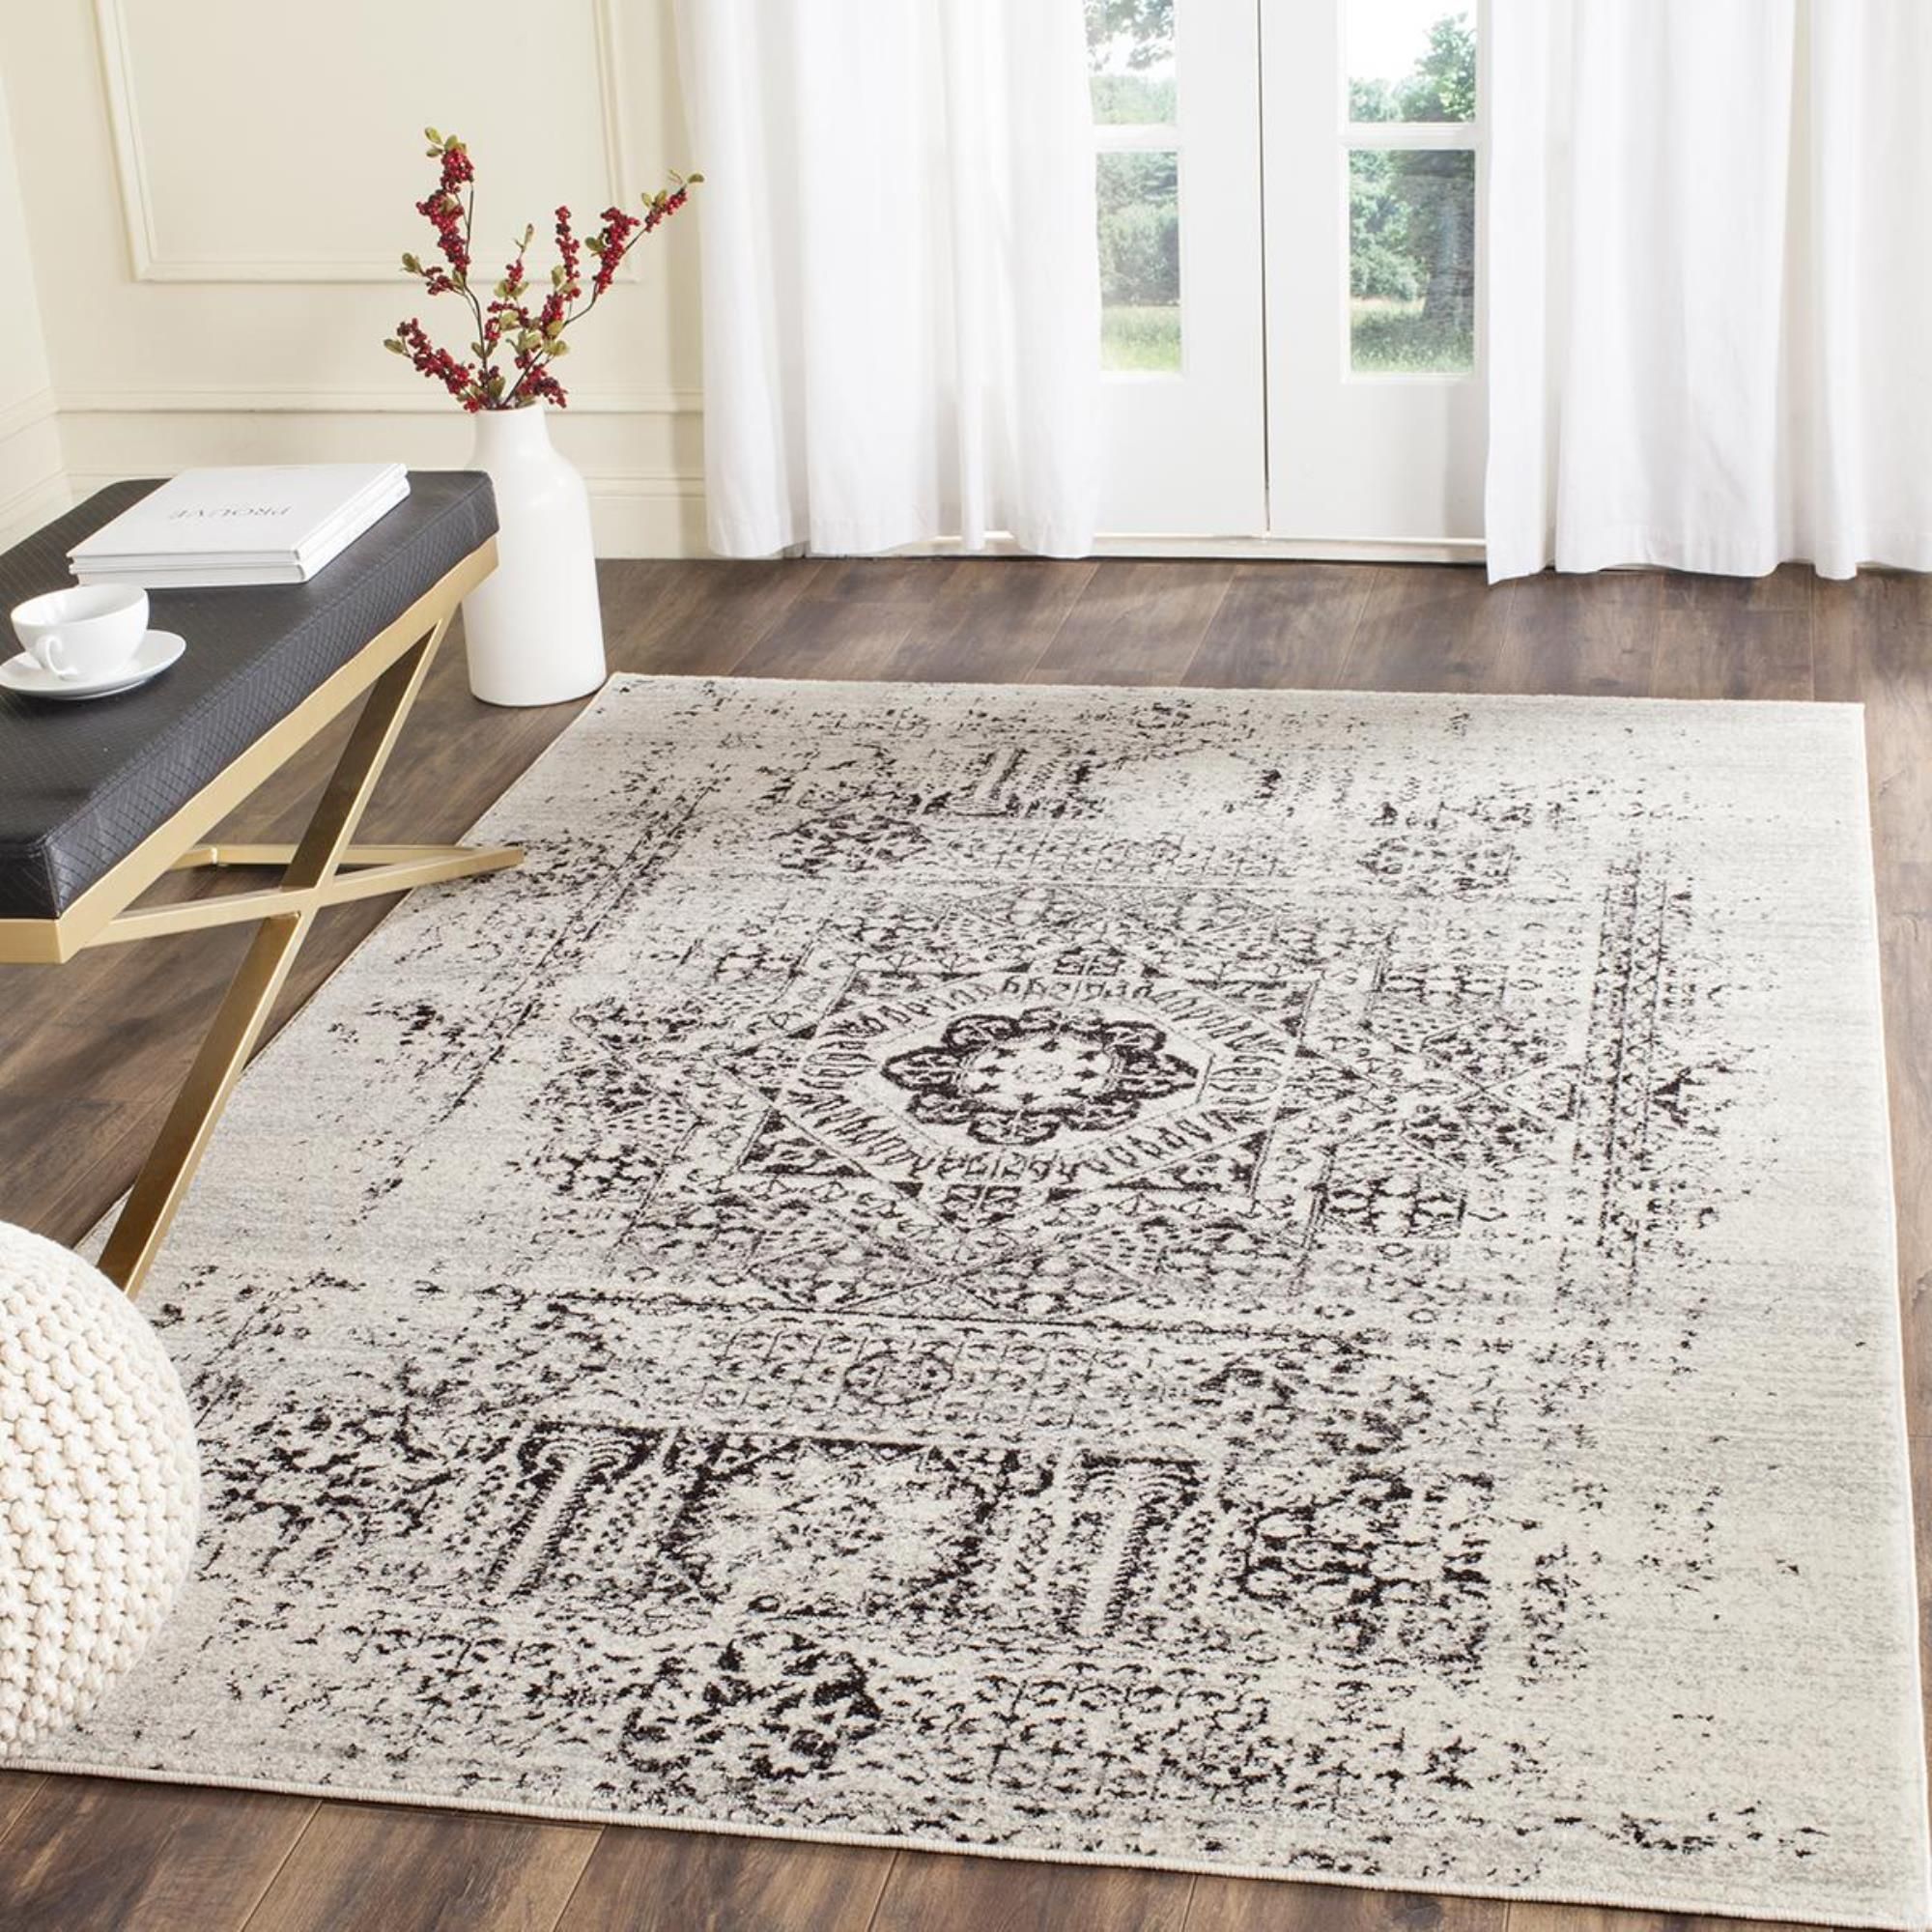 Safavieh Evoke Evk260t 4 4' X 6' Ivory/black Area Rug | Nfm Pertaining To Ivory And Black Rugs (Photo 7 of 15)